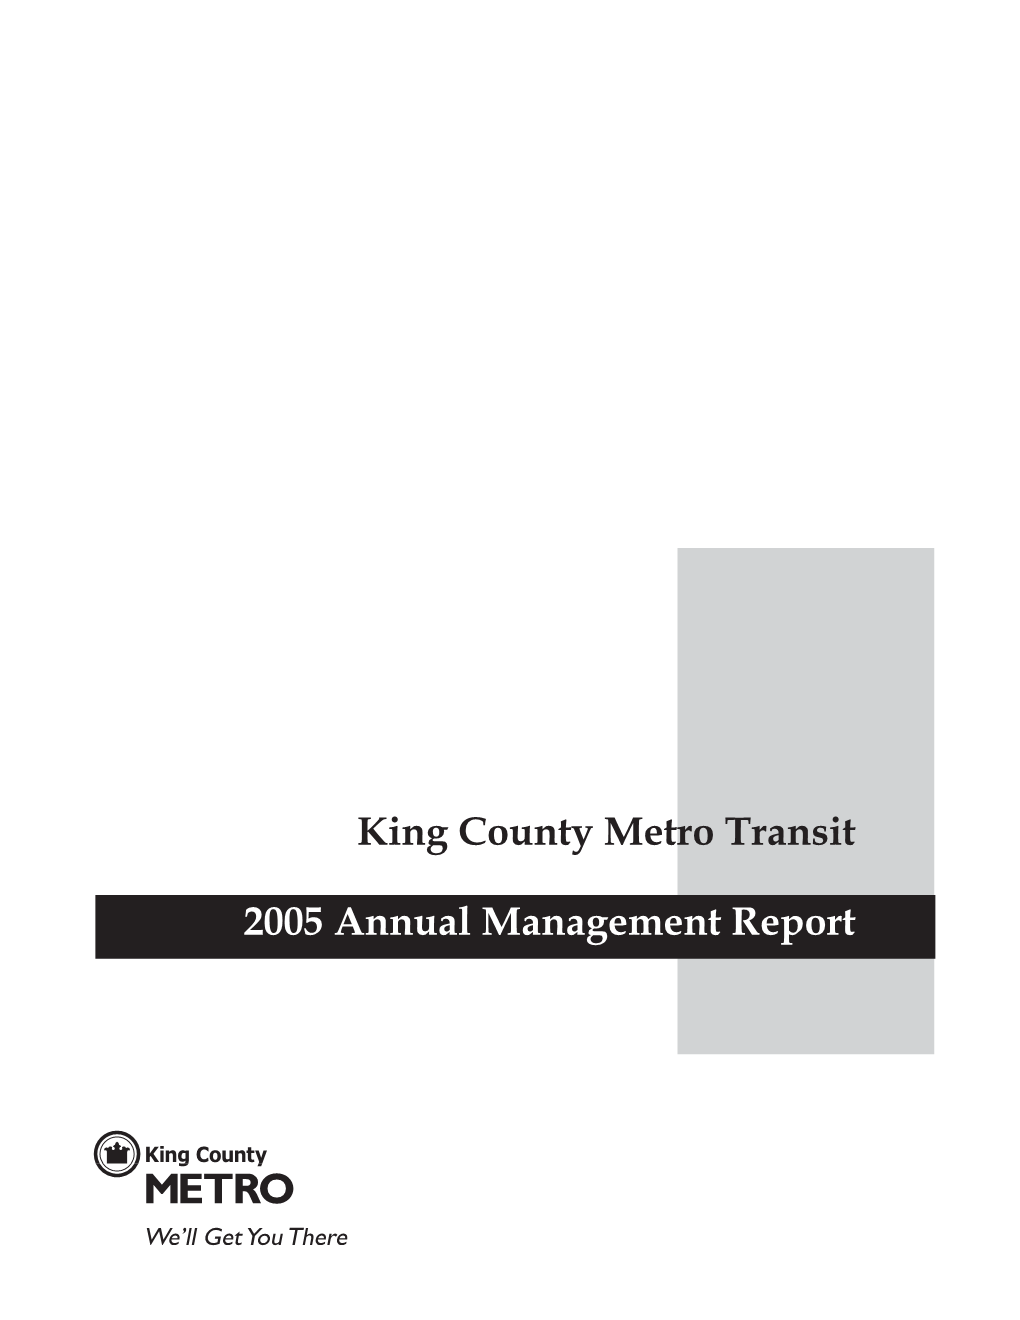 King County Metro Transit 2005 Annual Management Report